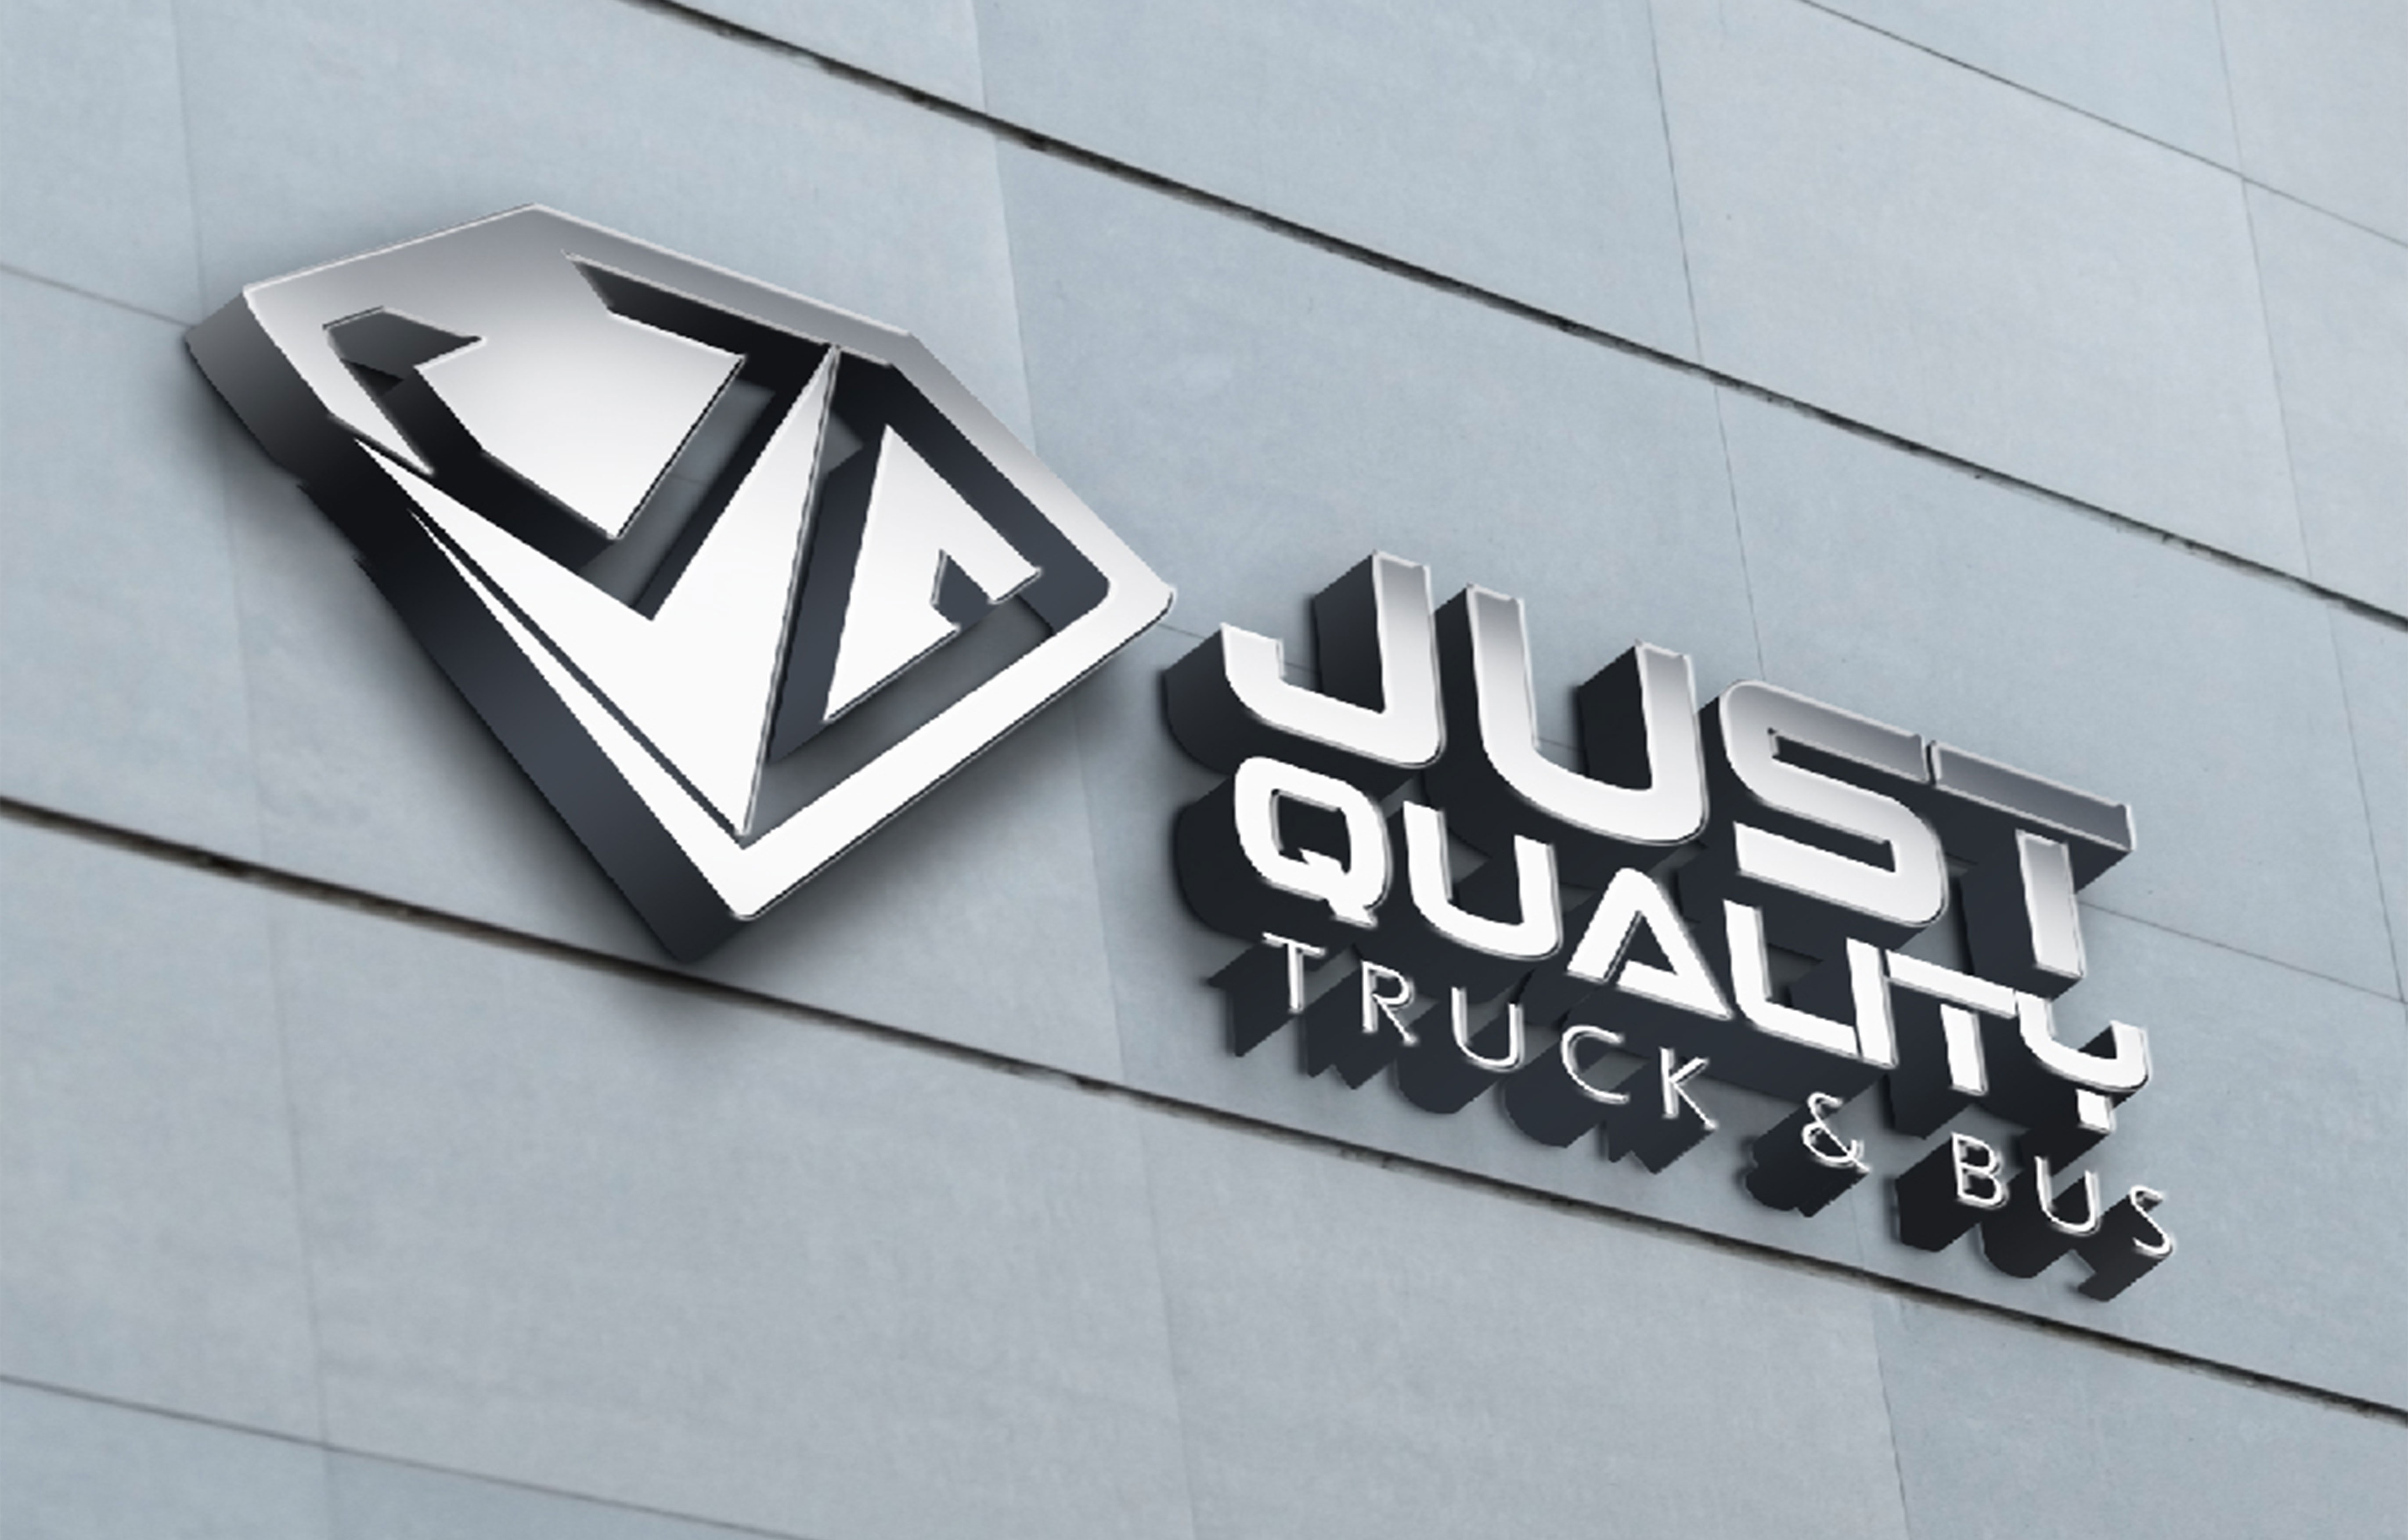 Just Quality Truck & Bus | Signup Design | Design & Consulting